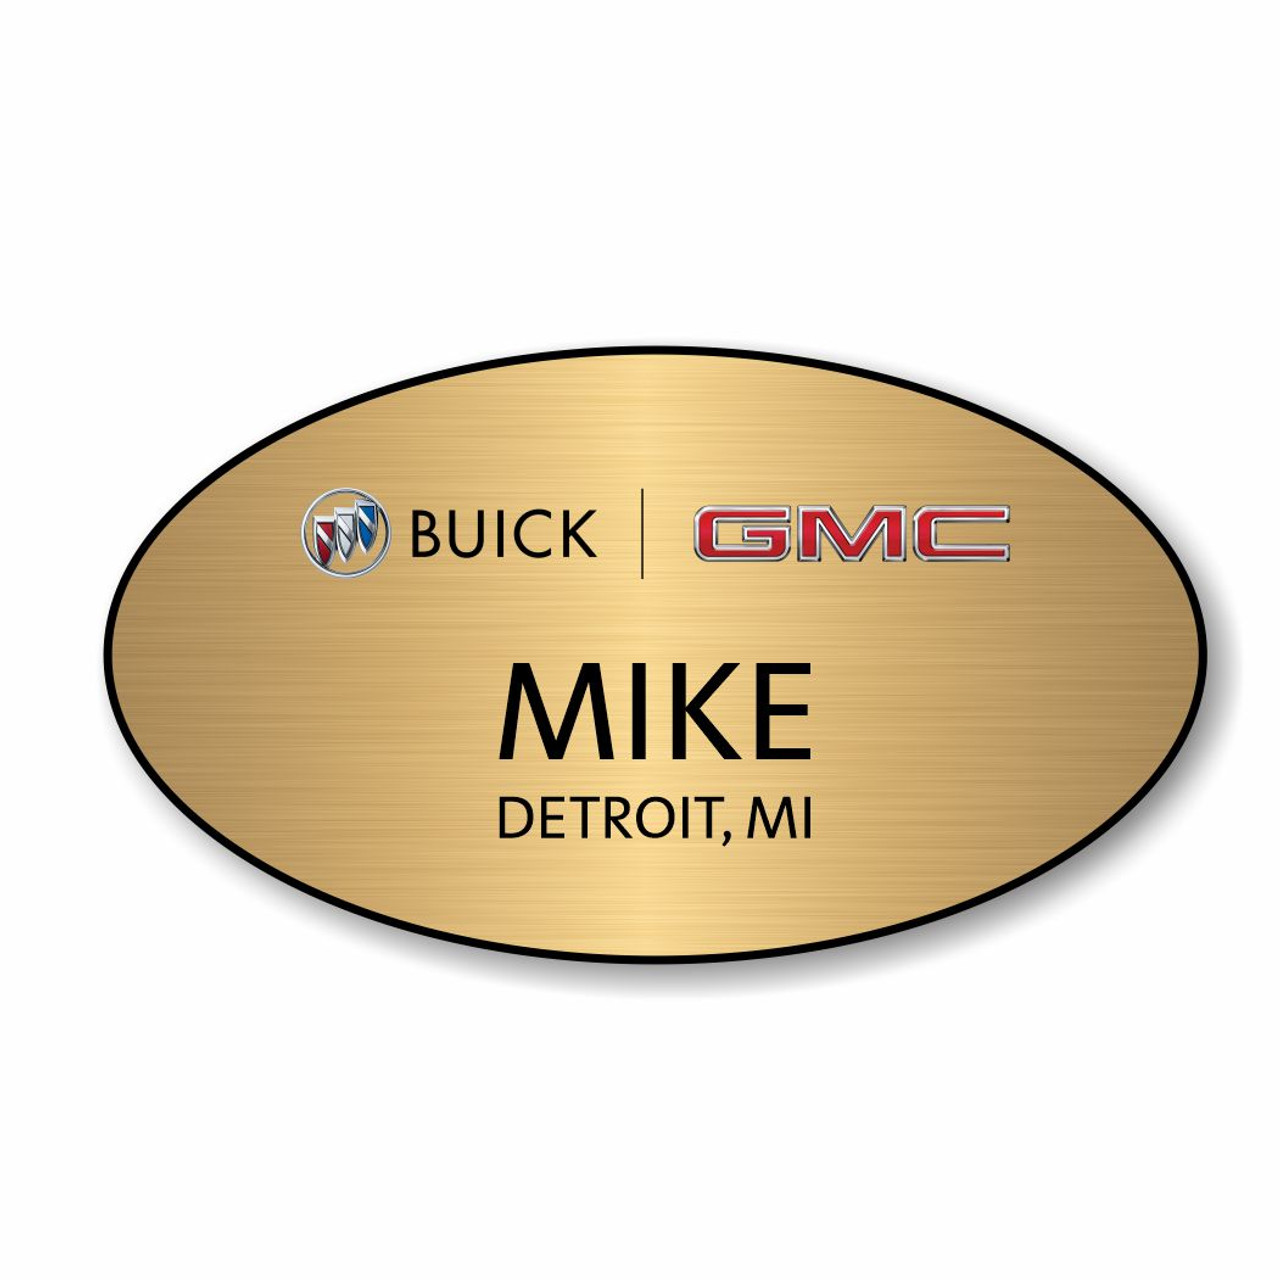 Buick GMC Gold Oval Name Badge